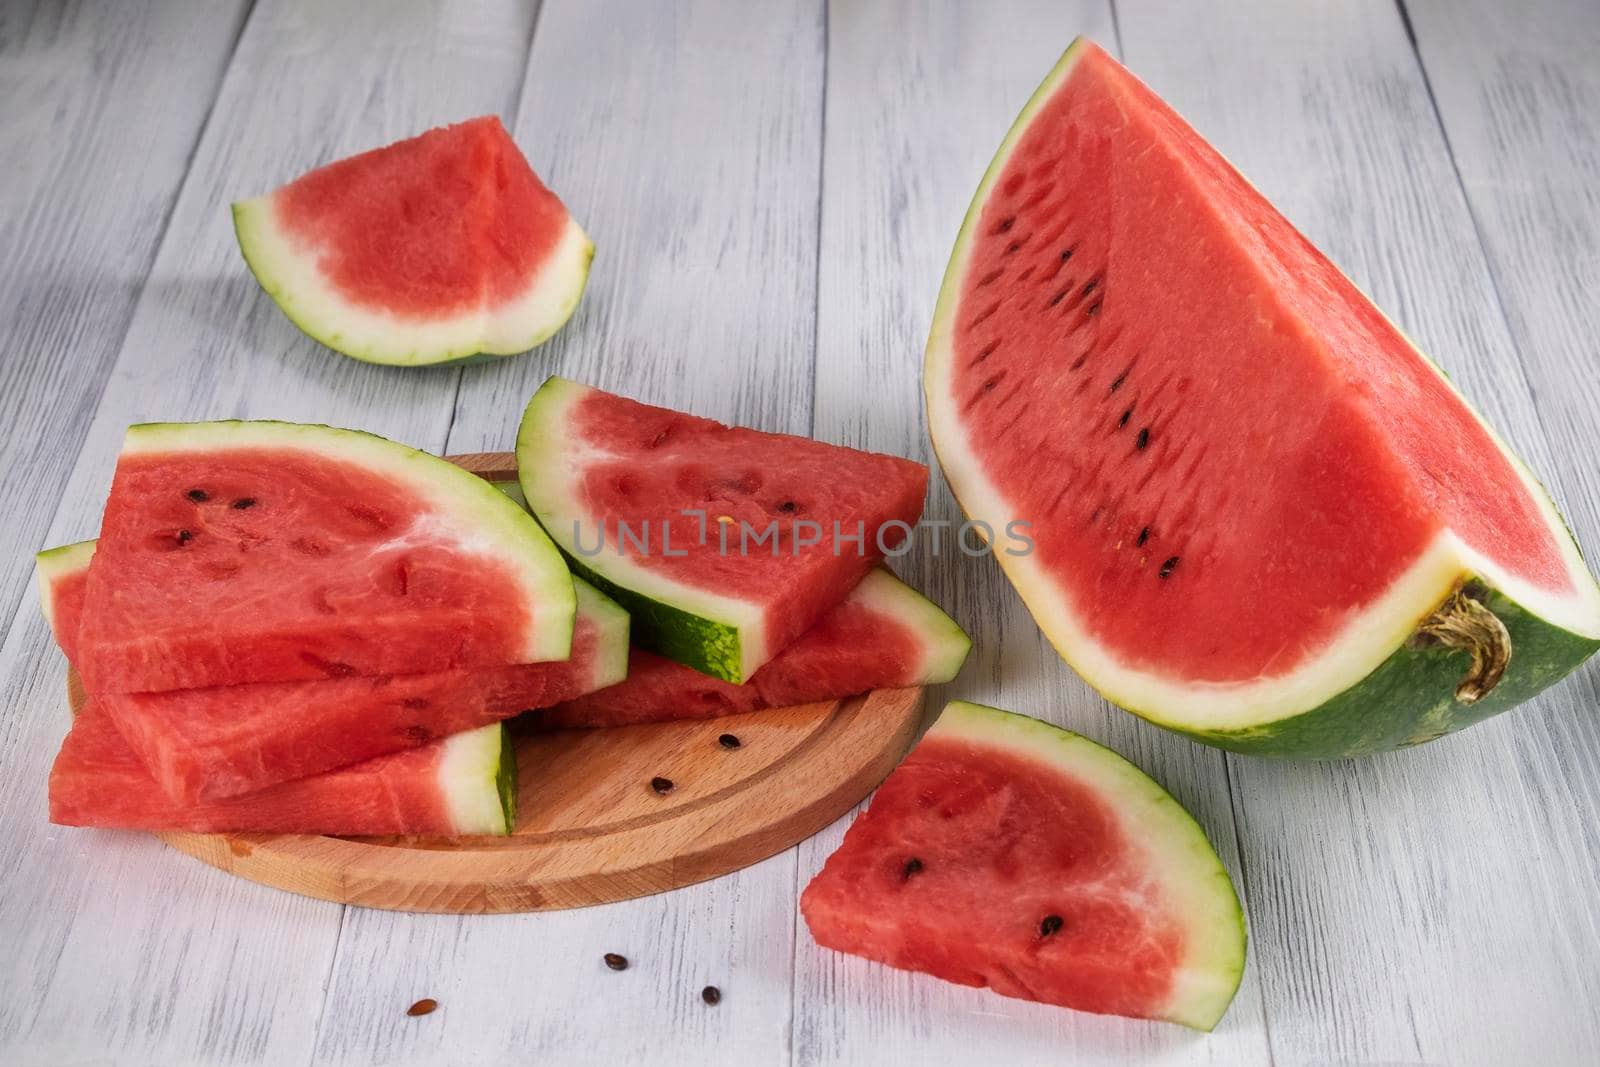 Close-up of sliced pieces of ripe red watermelon on a light wooden surface. Healthy food concept, summer food. Selective focus.